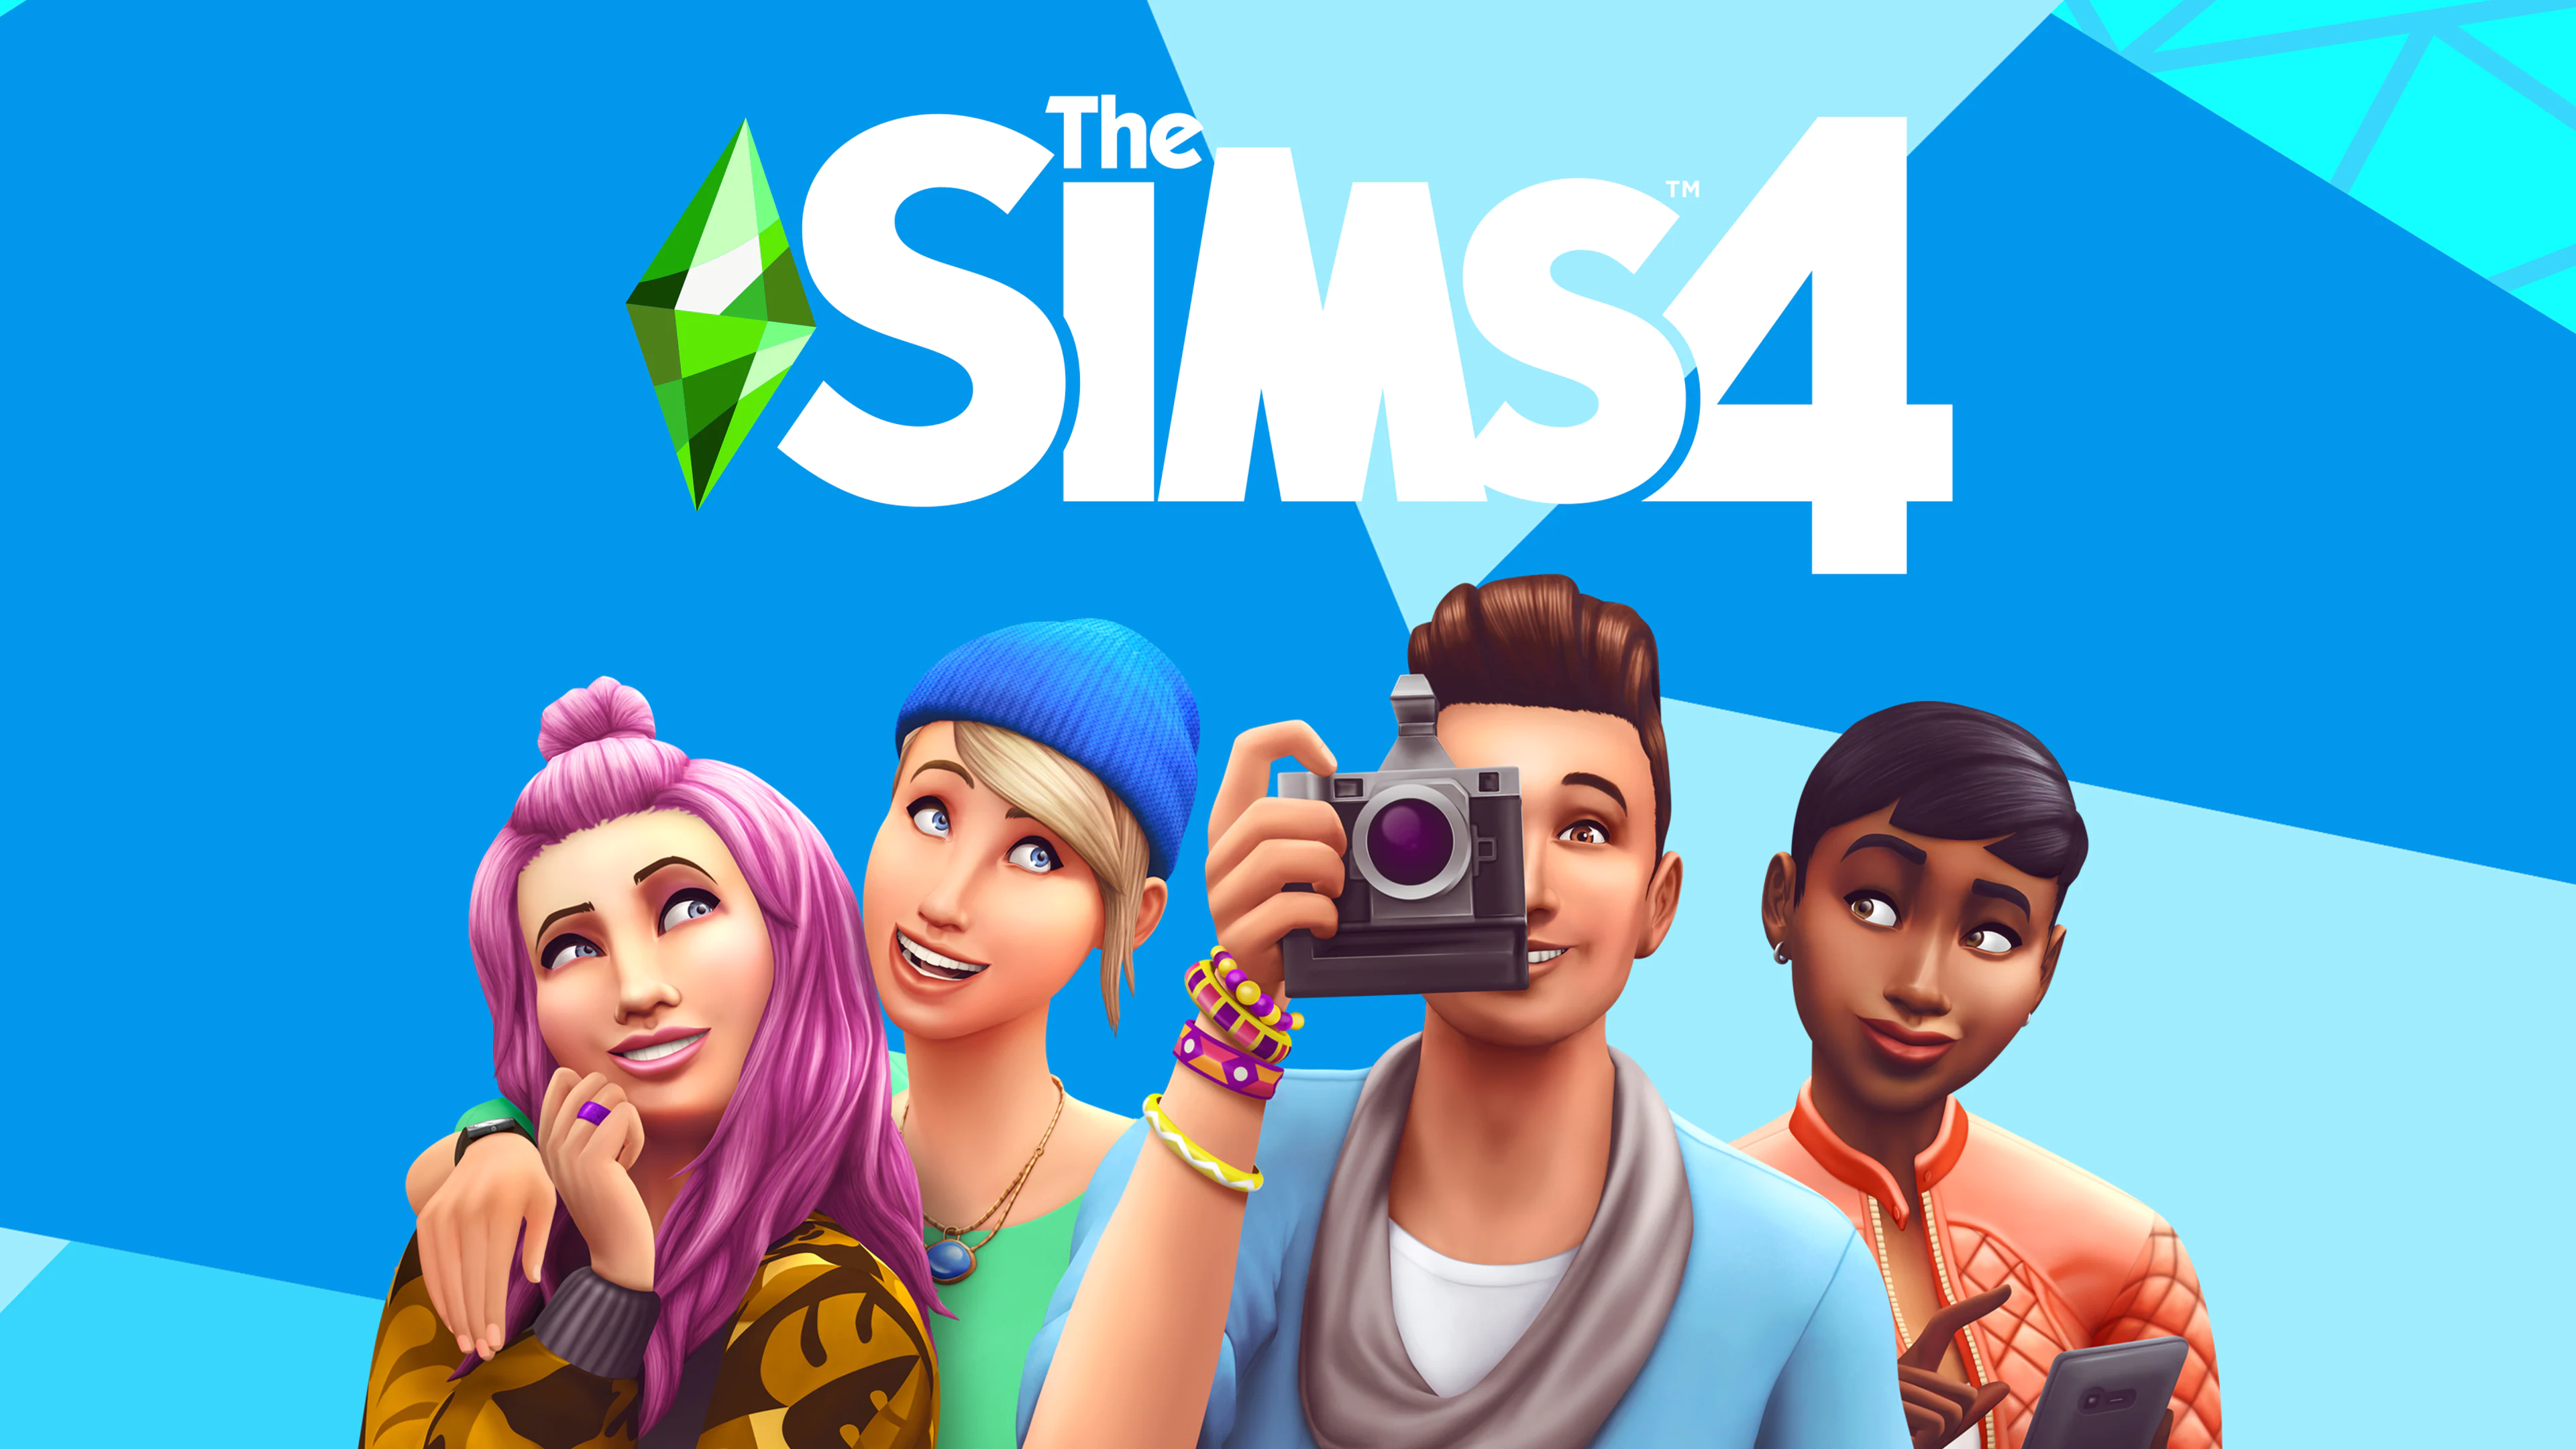 The Sims 4 (game)